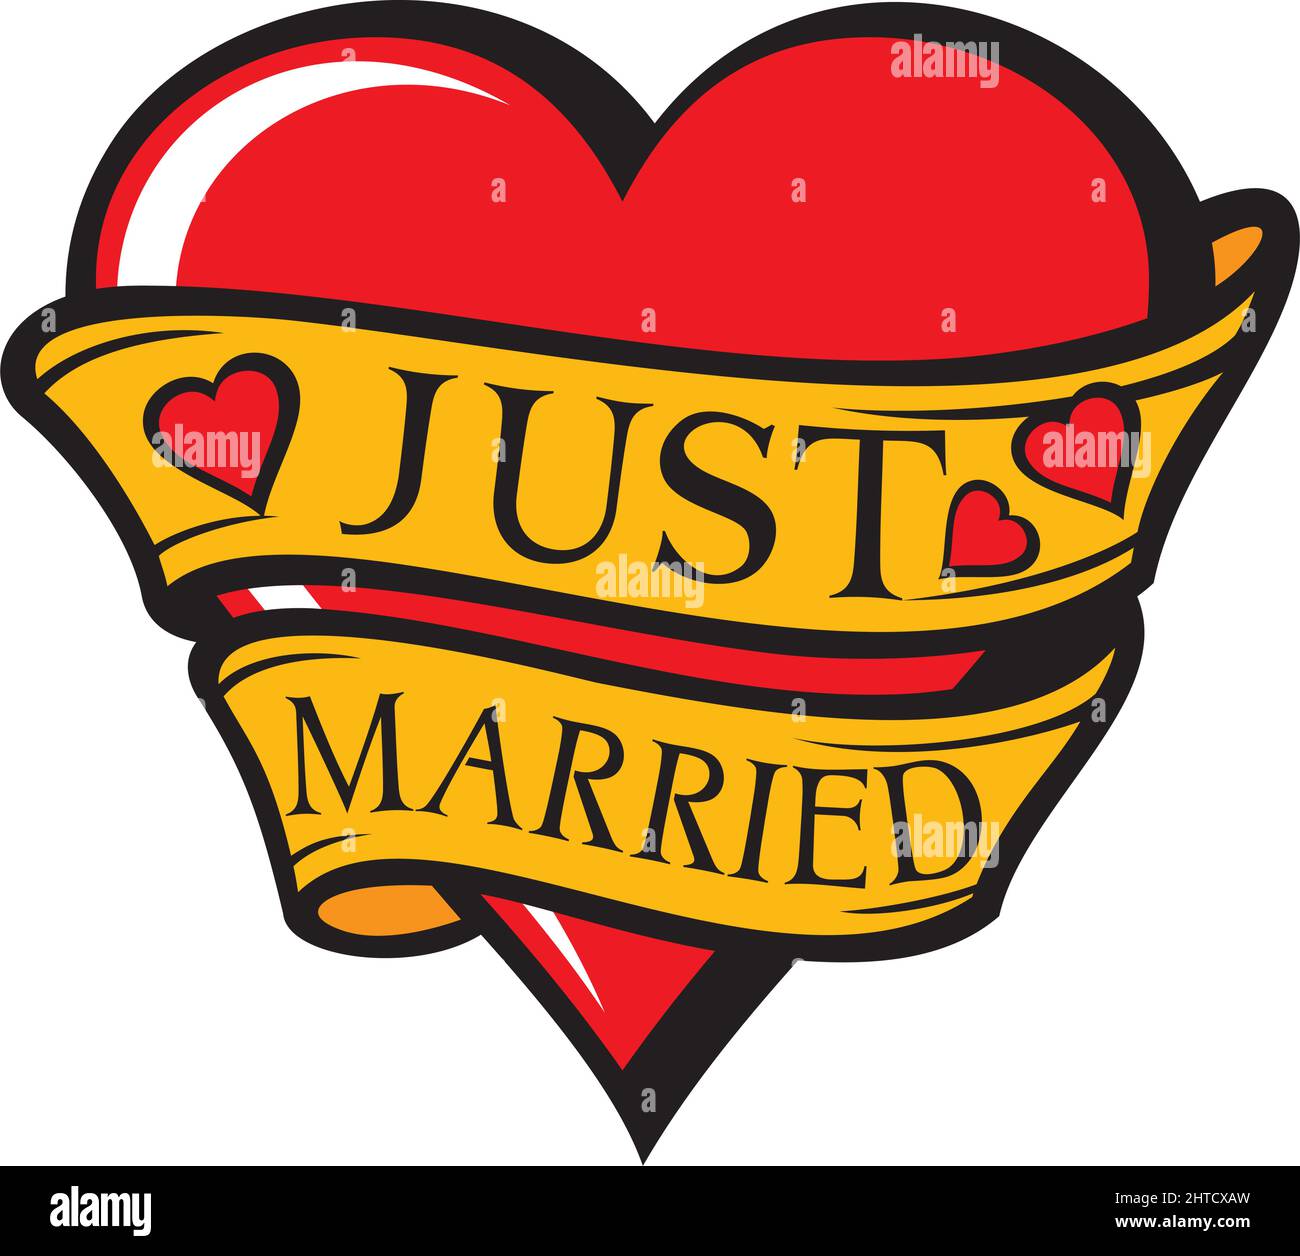 Just married design with heart vector illustration Stock Vector